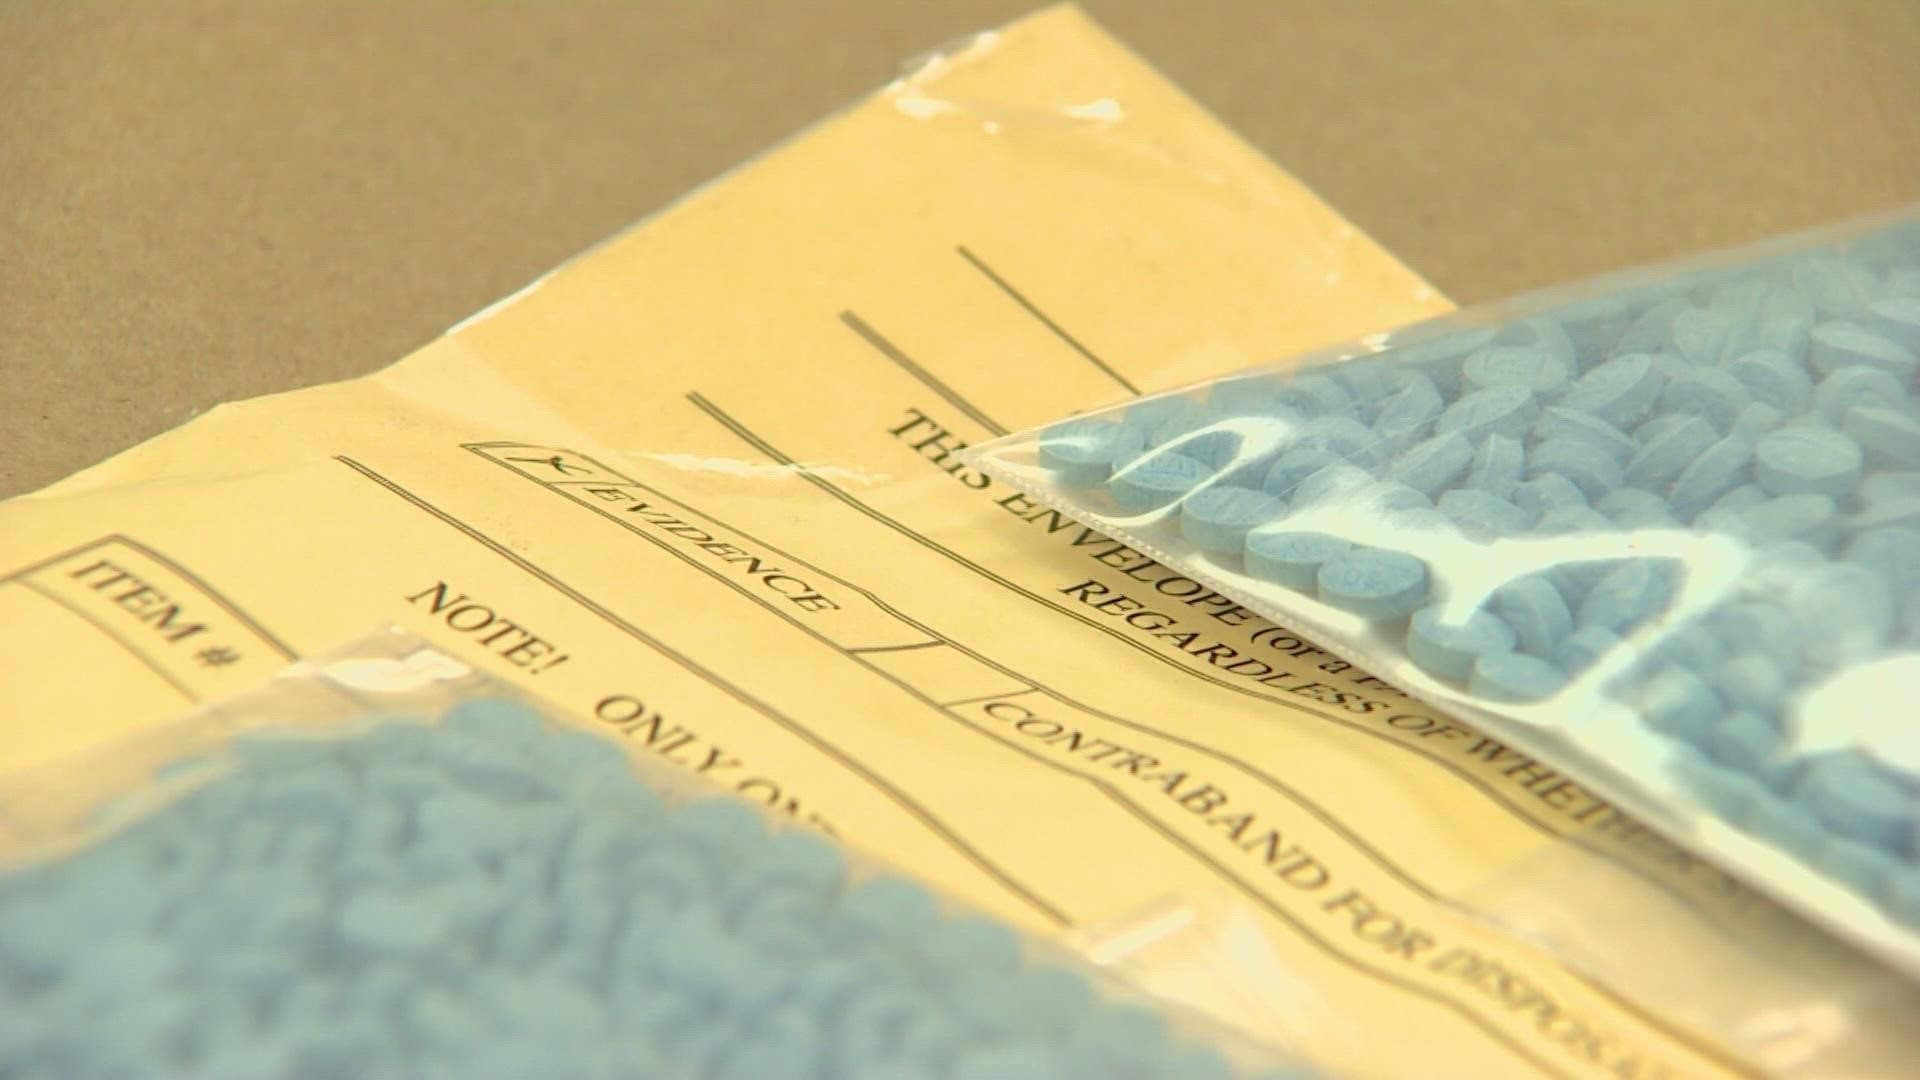 Seattle police is working with federal partners to battle the fentanyl crisis throughout the region.